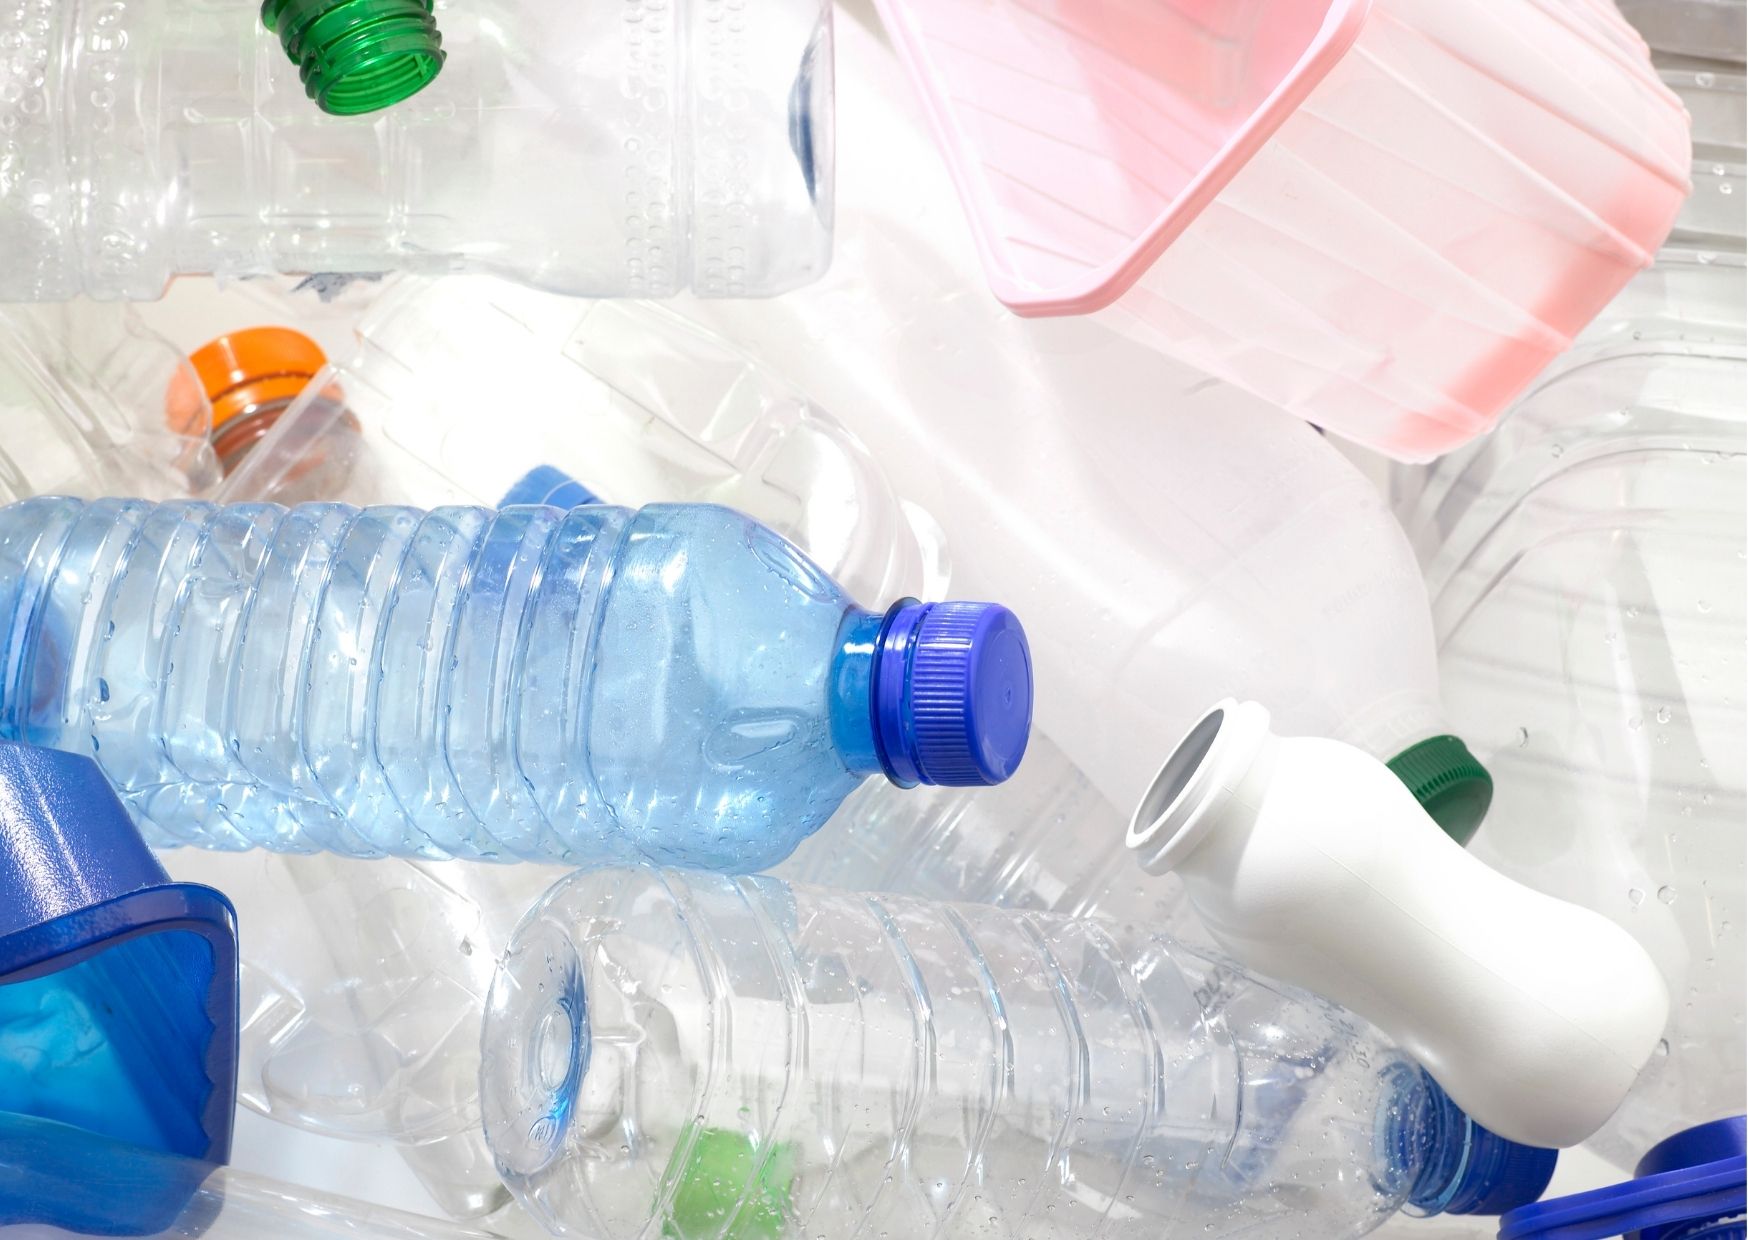 Plastic recycling news from the world of waste in July